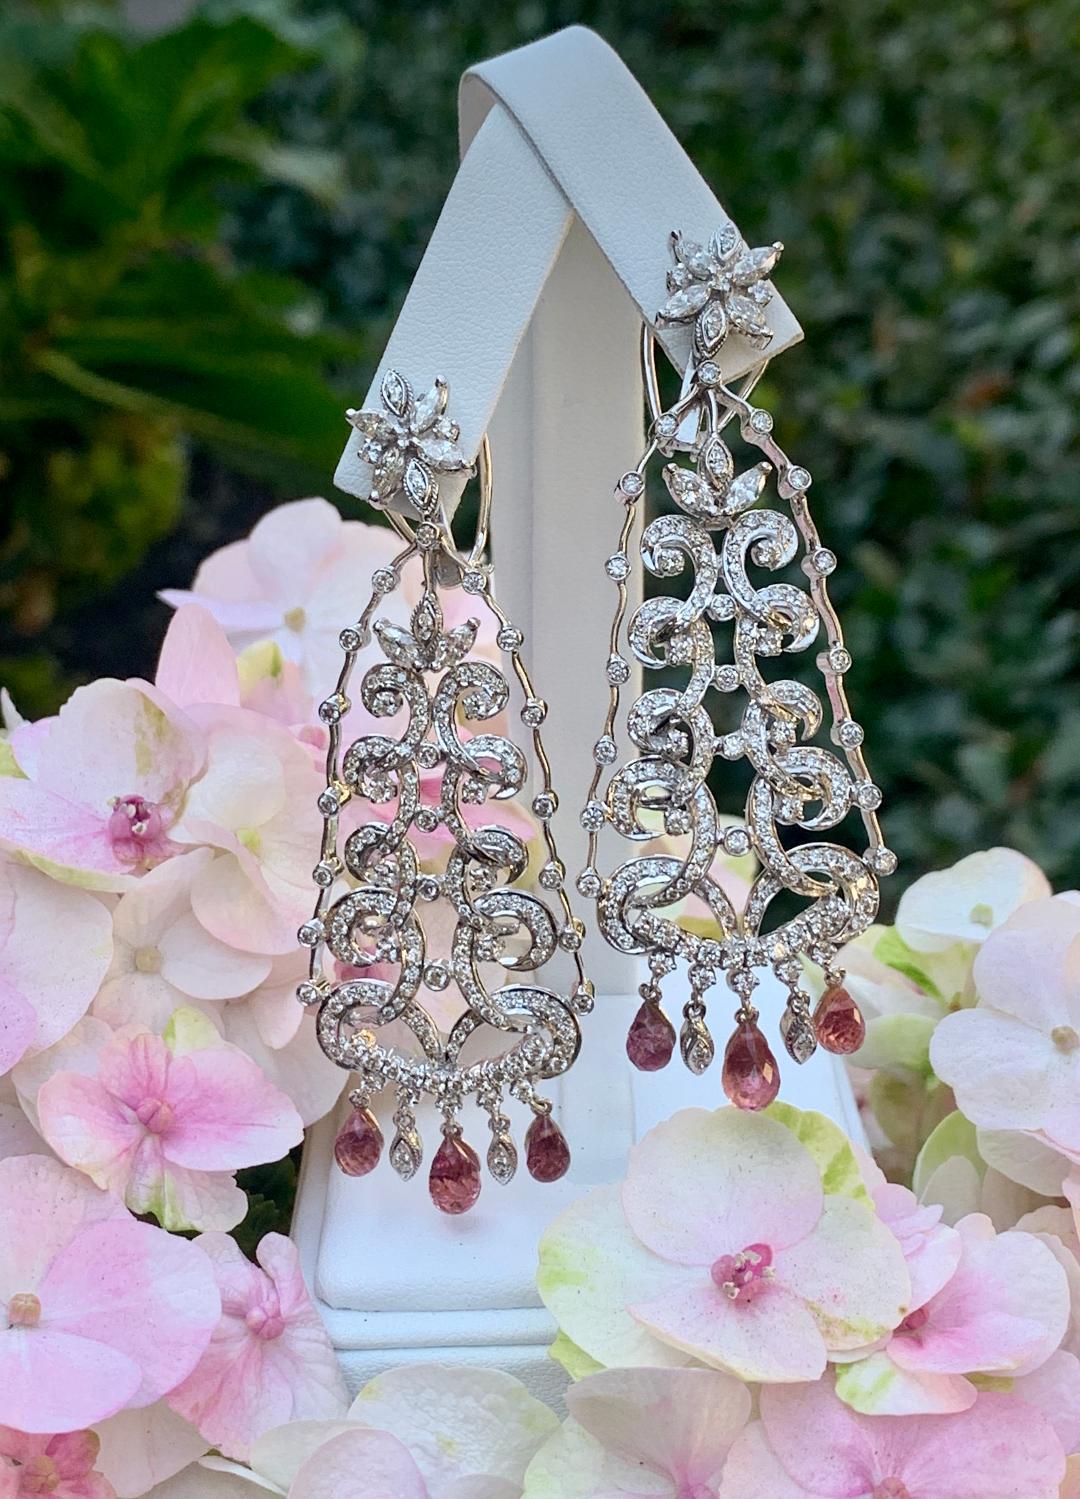 These captivating custom-made 18 karat white gold estate Christmas tree design chandelier earrings for pierced ears feature an elaborate design dangling with diamond filagree and pink sapphire drops that are totally dazzling!  They are destined to